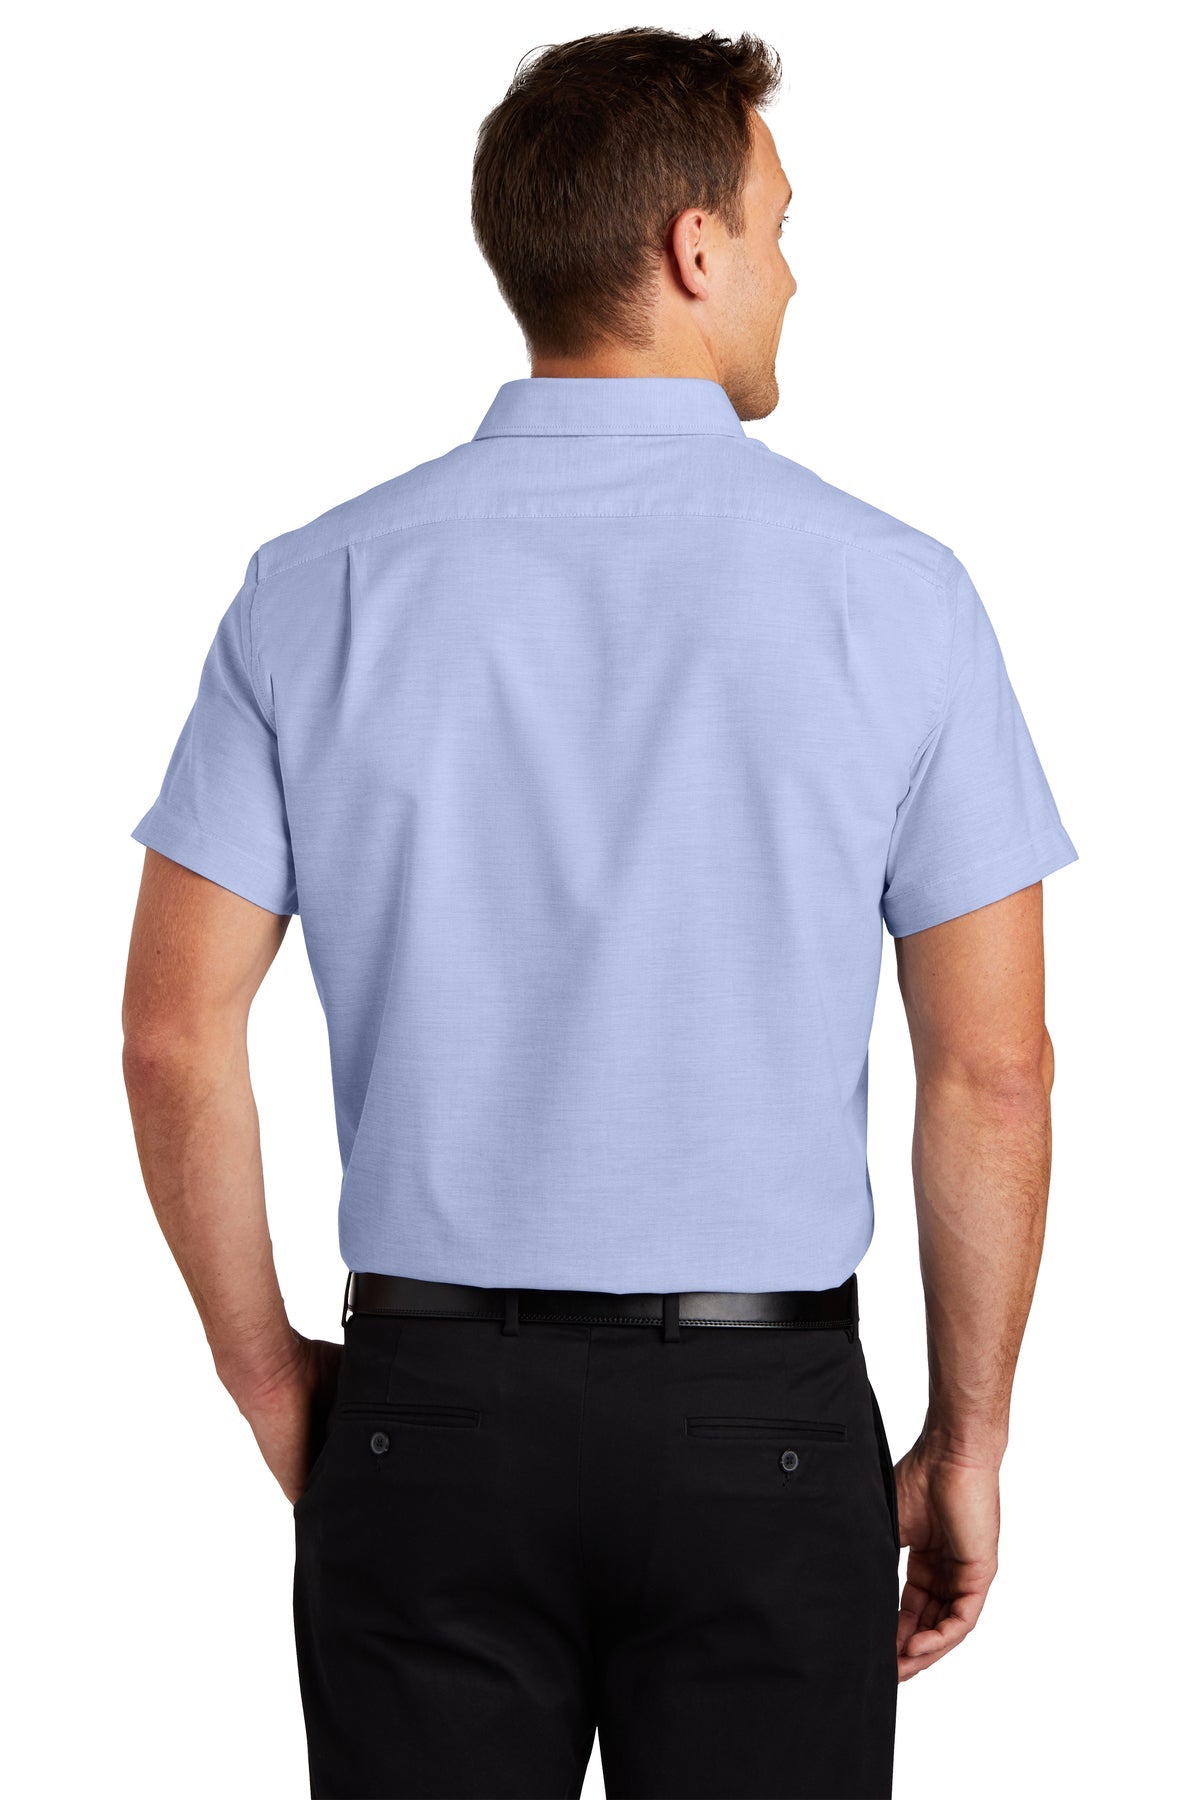 port authority_s659 _oxford blue_company_logo_button downs